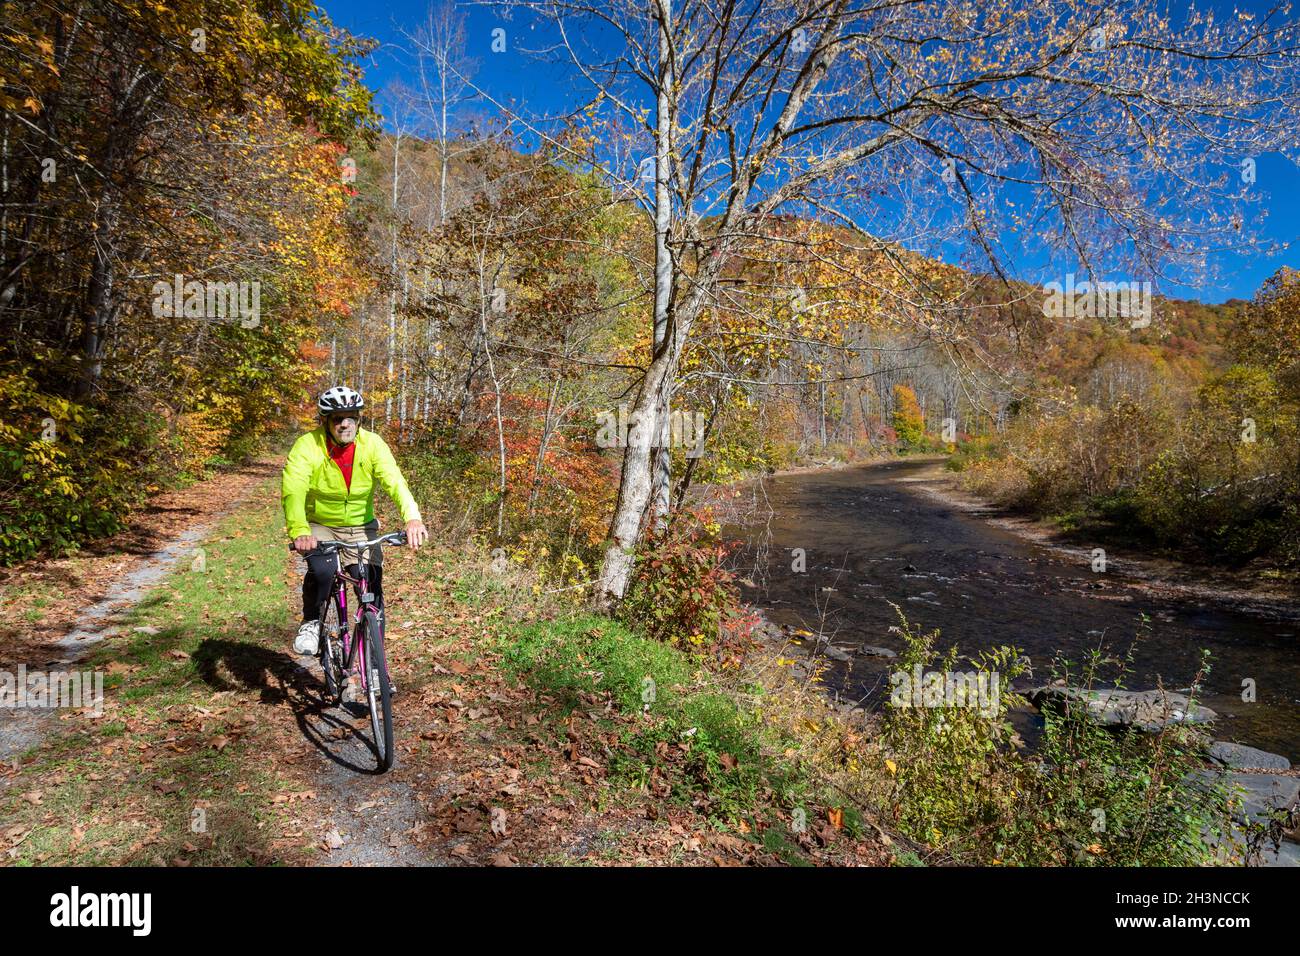 Martinton, West Virginia - John West, 75, bicycles on the Greenbrier River Trail. The 78-mile rail trail runs along the Greenbrier River. Now a linear Stock Photo